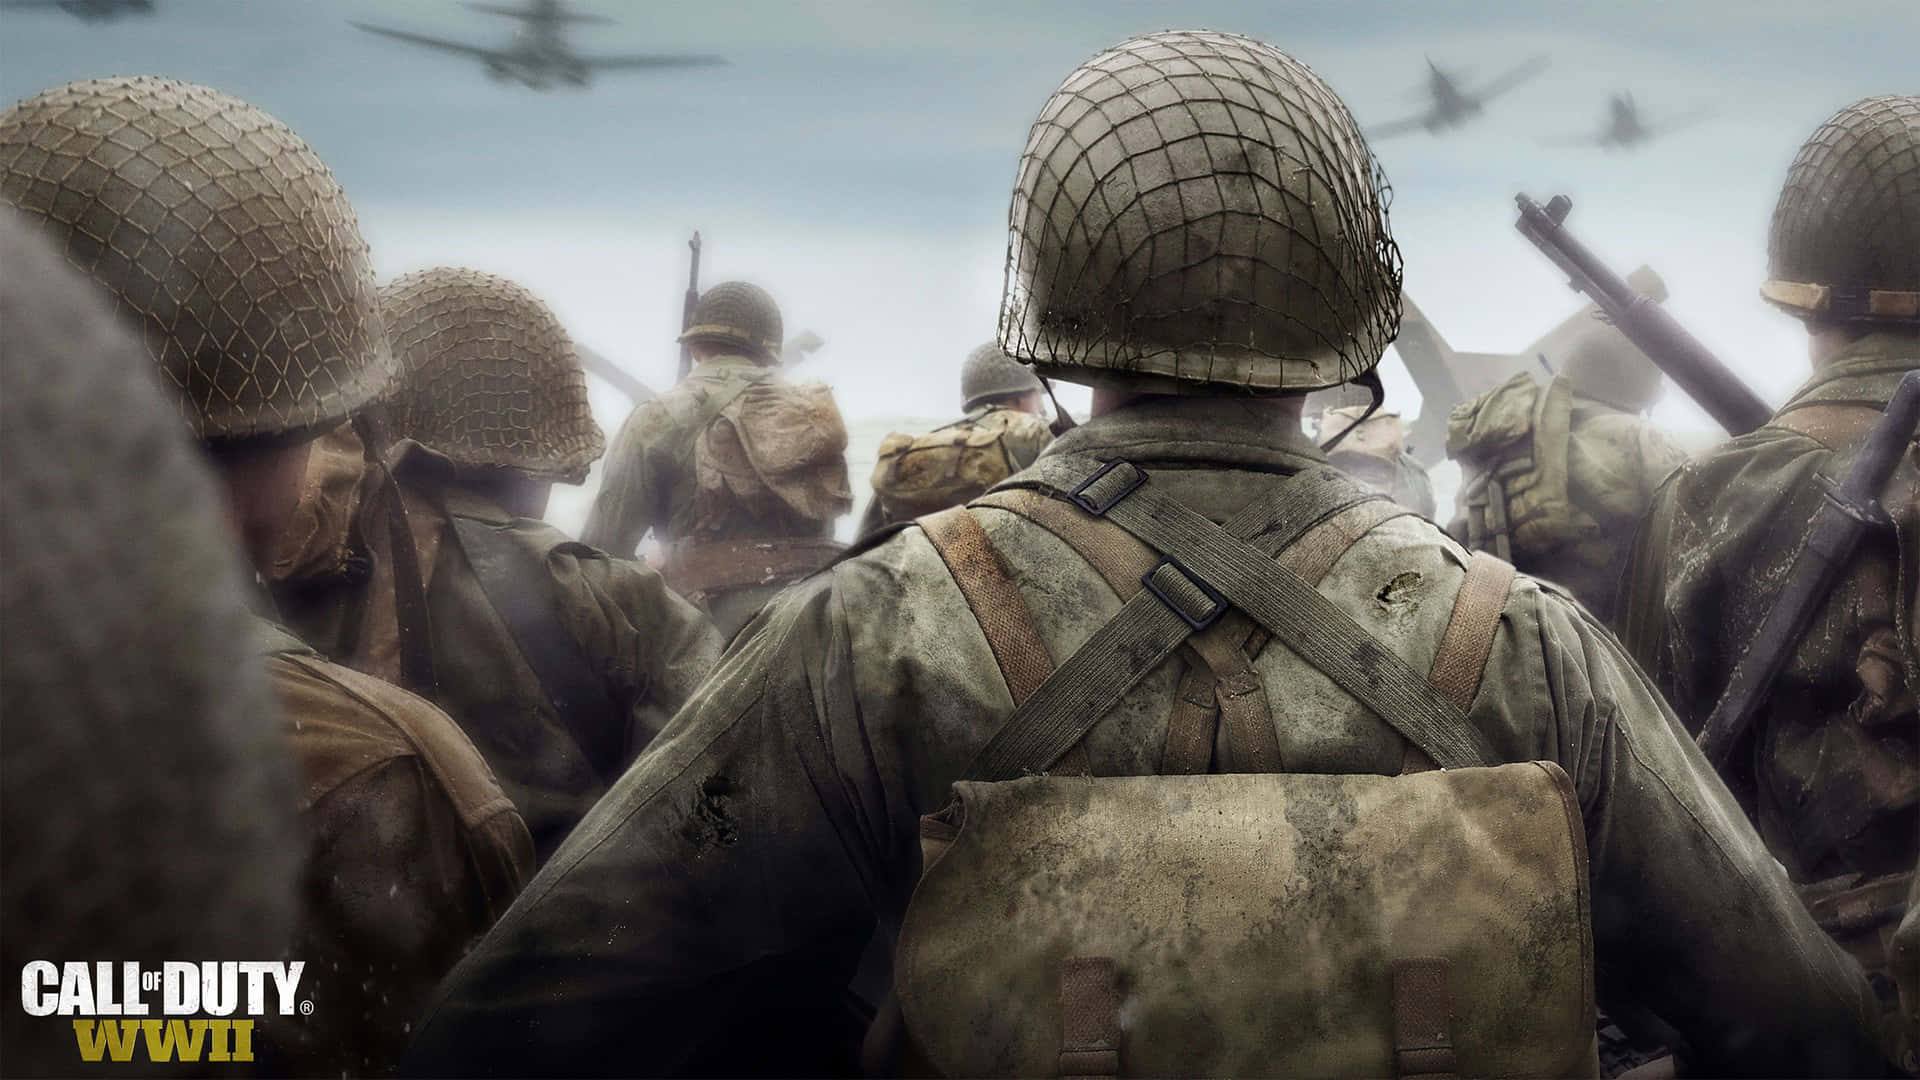 Dive into the World of Call of Duty